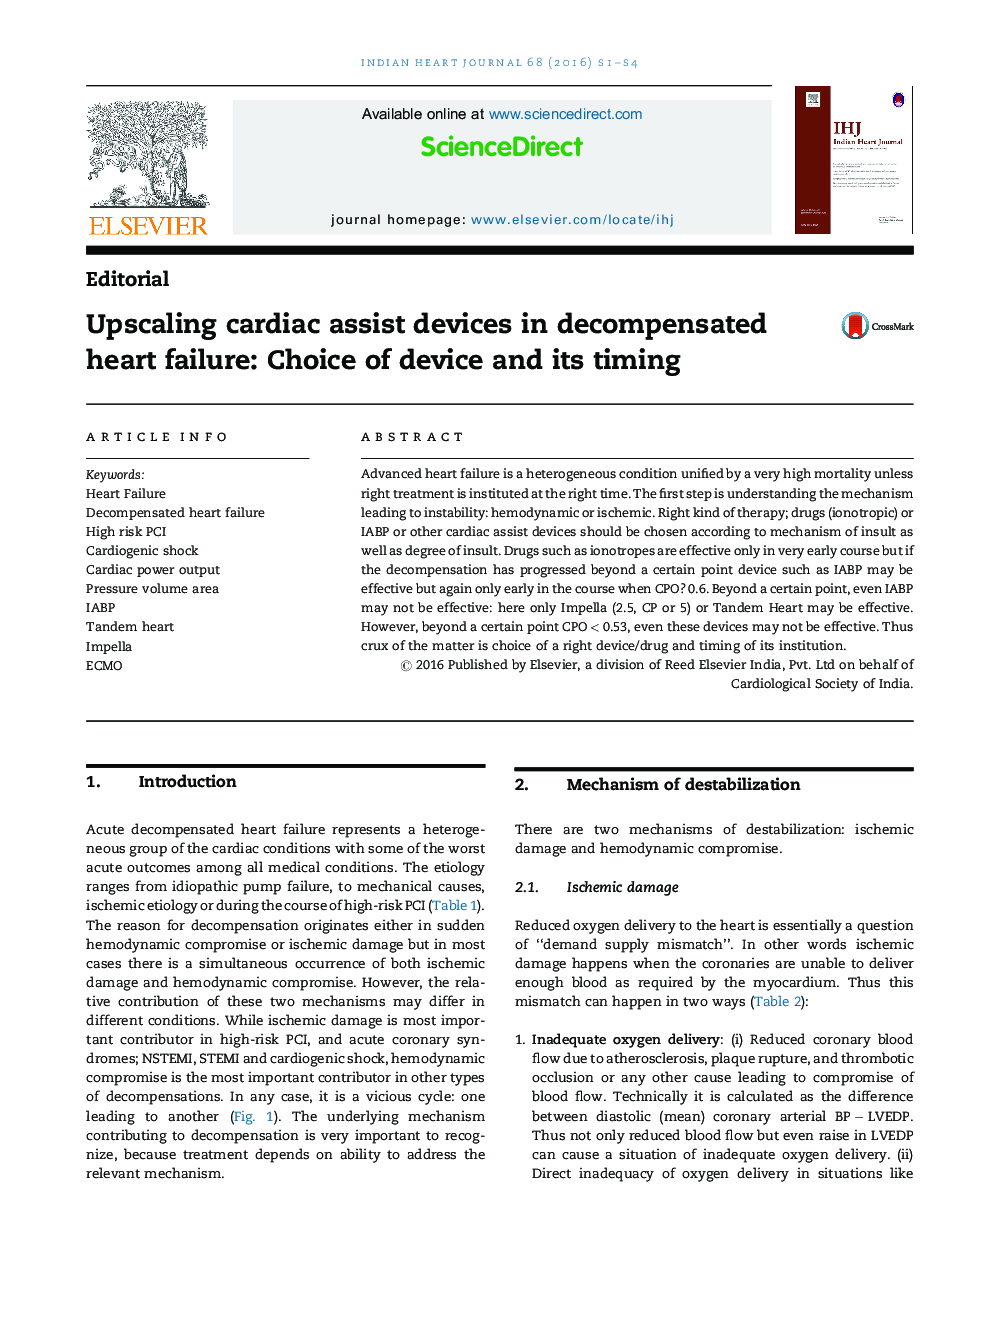 Upscaling cardiac assist devices in decompensated heart failure: Choice of device and its timing